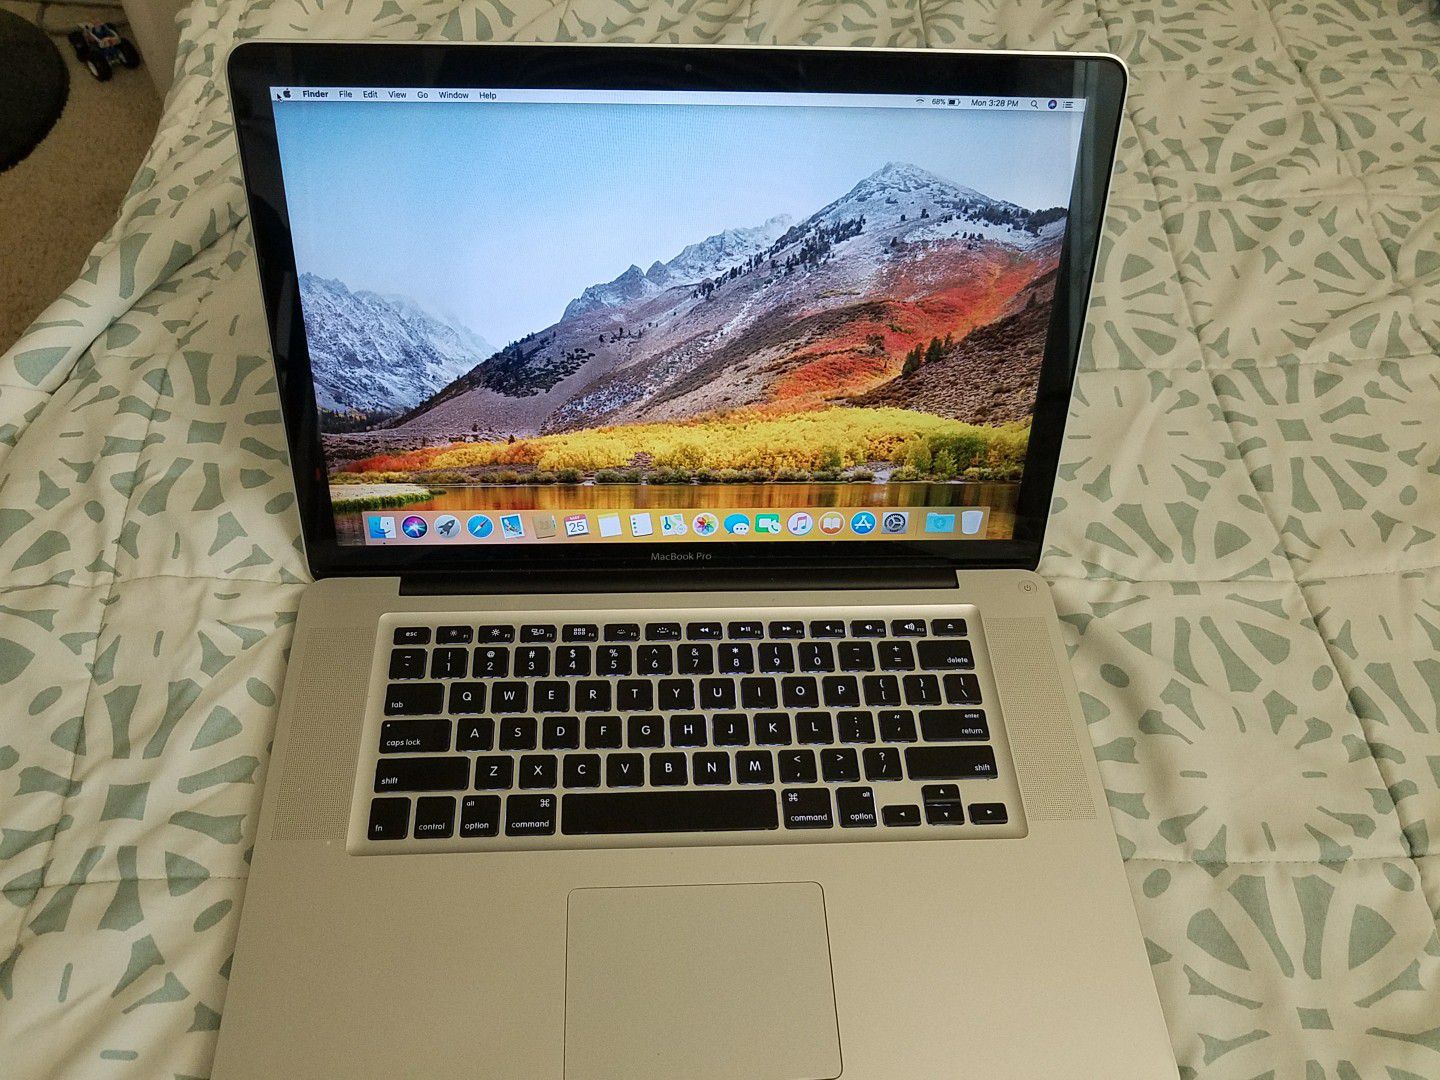 Macbook Pro 15inch Early 2011 with Intel core i7 processor, 8gb Ram, 256gb SSD drive, macOS High Sierra. Comes with charger. New battery.